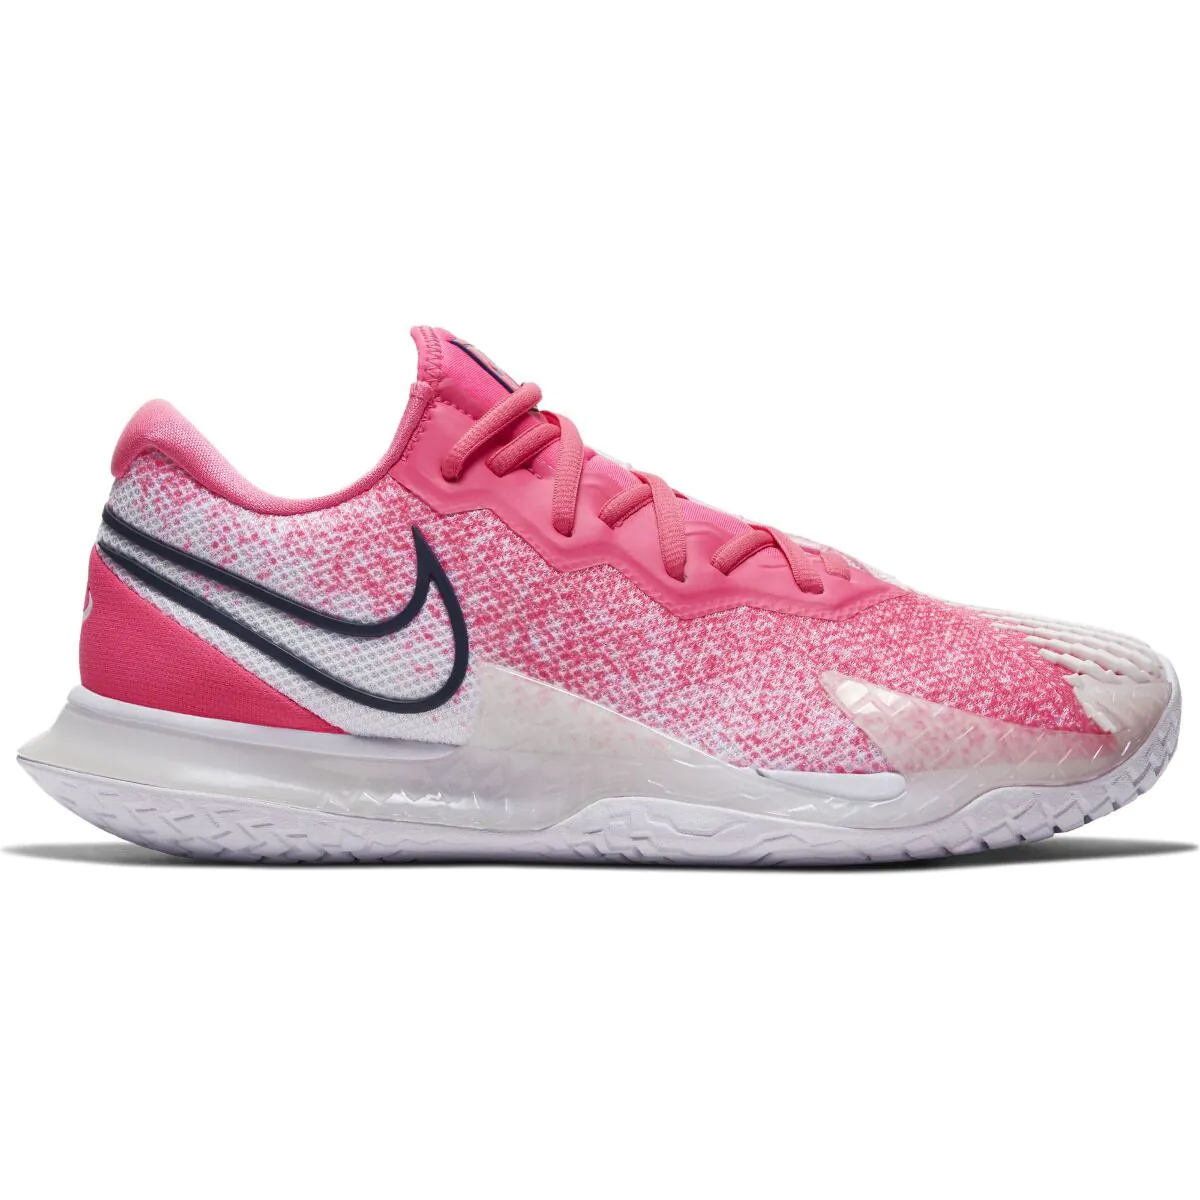 Giày Tennis Nike Zoom Vapor Cage 4 'Digital Pink' Cd0424-600 - Authentic- Shoes